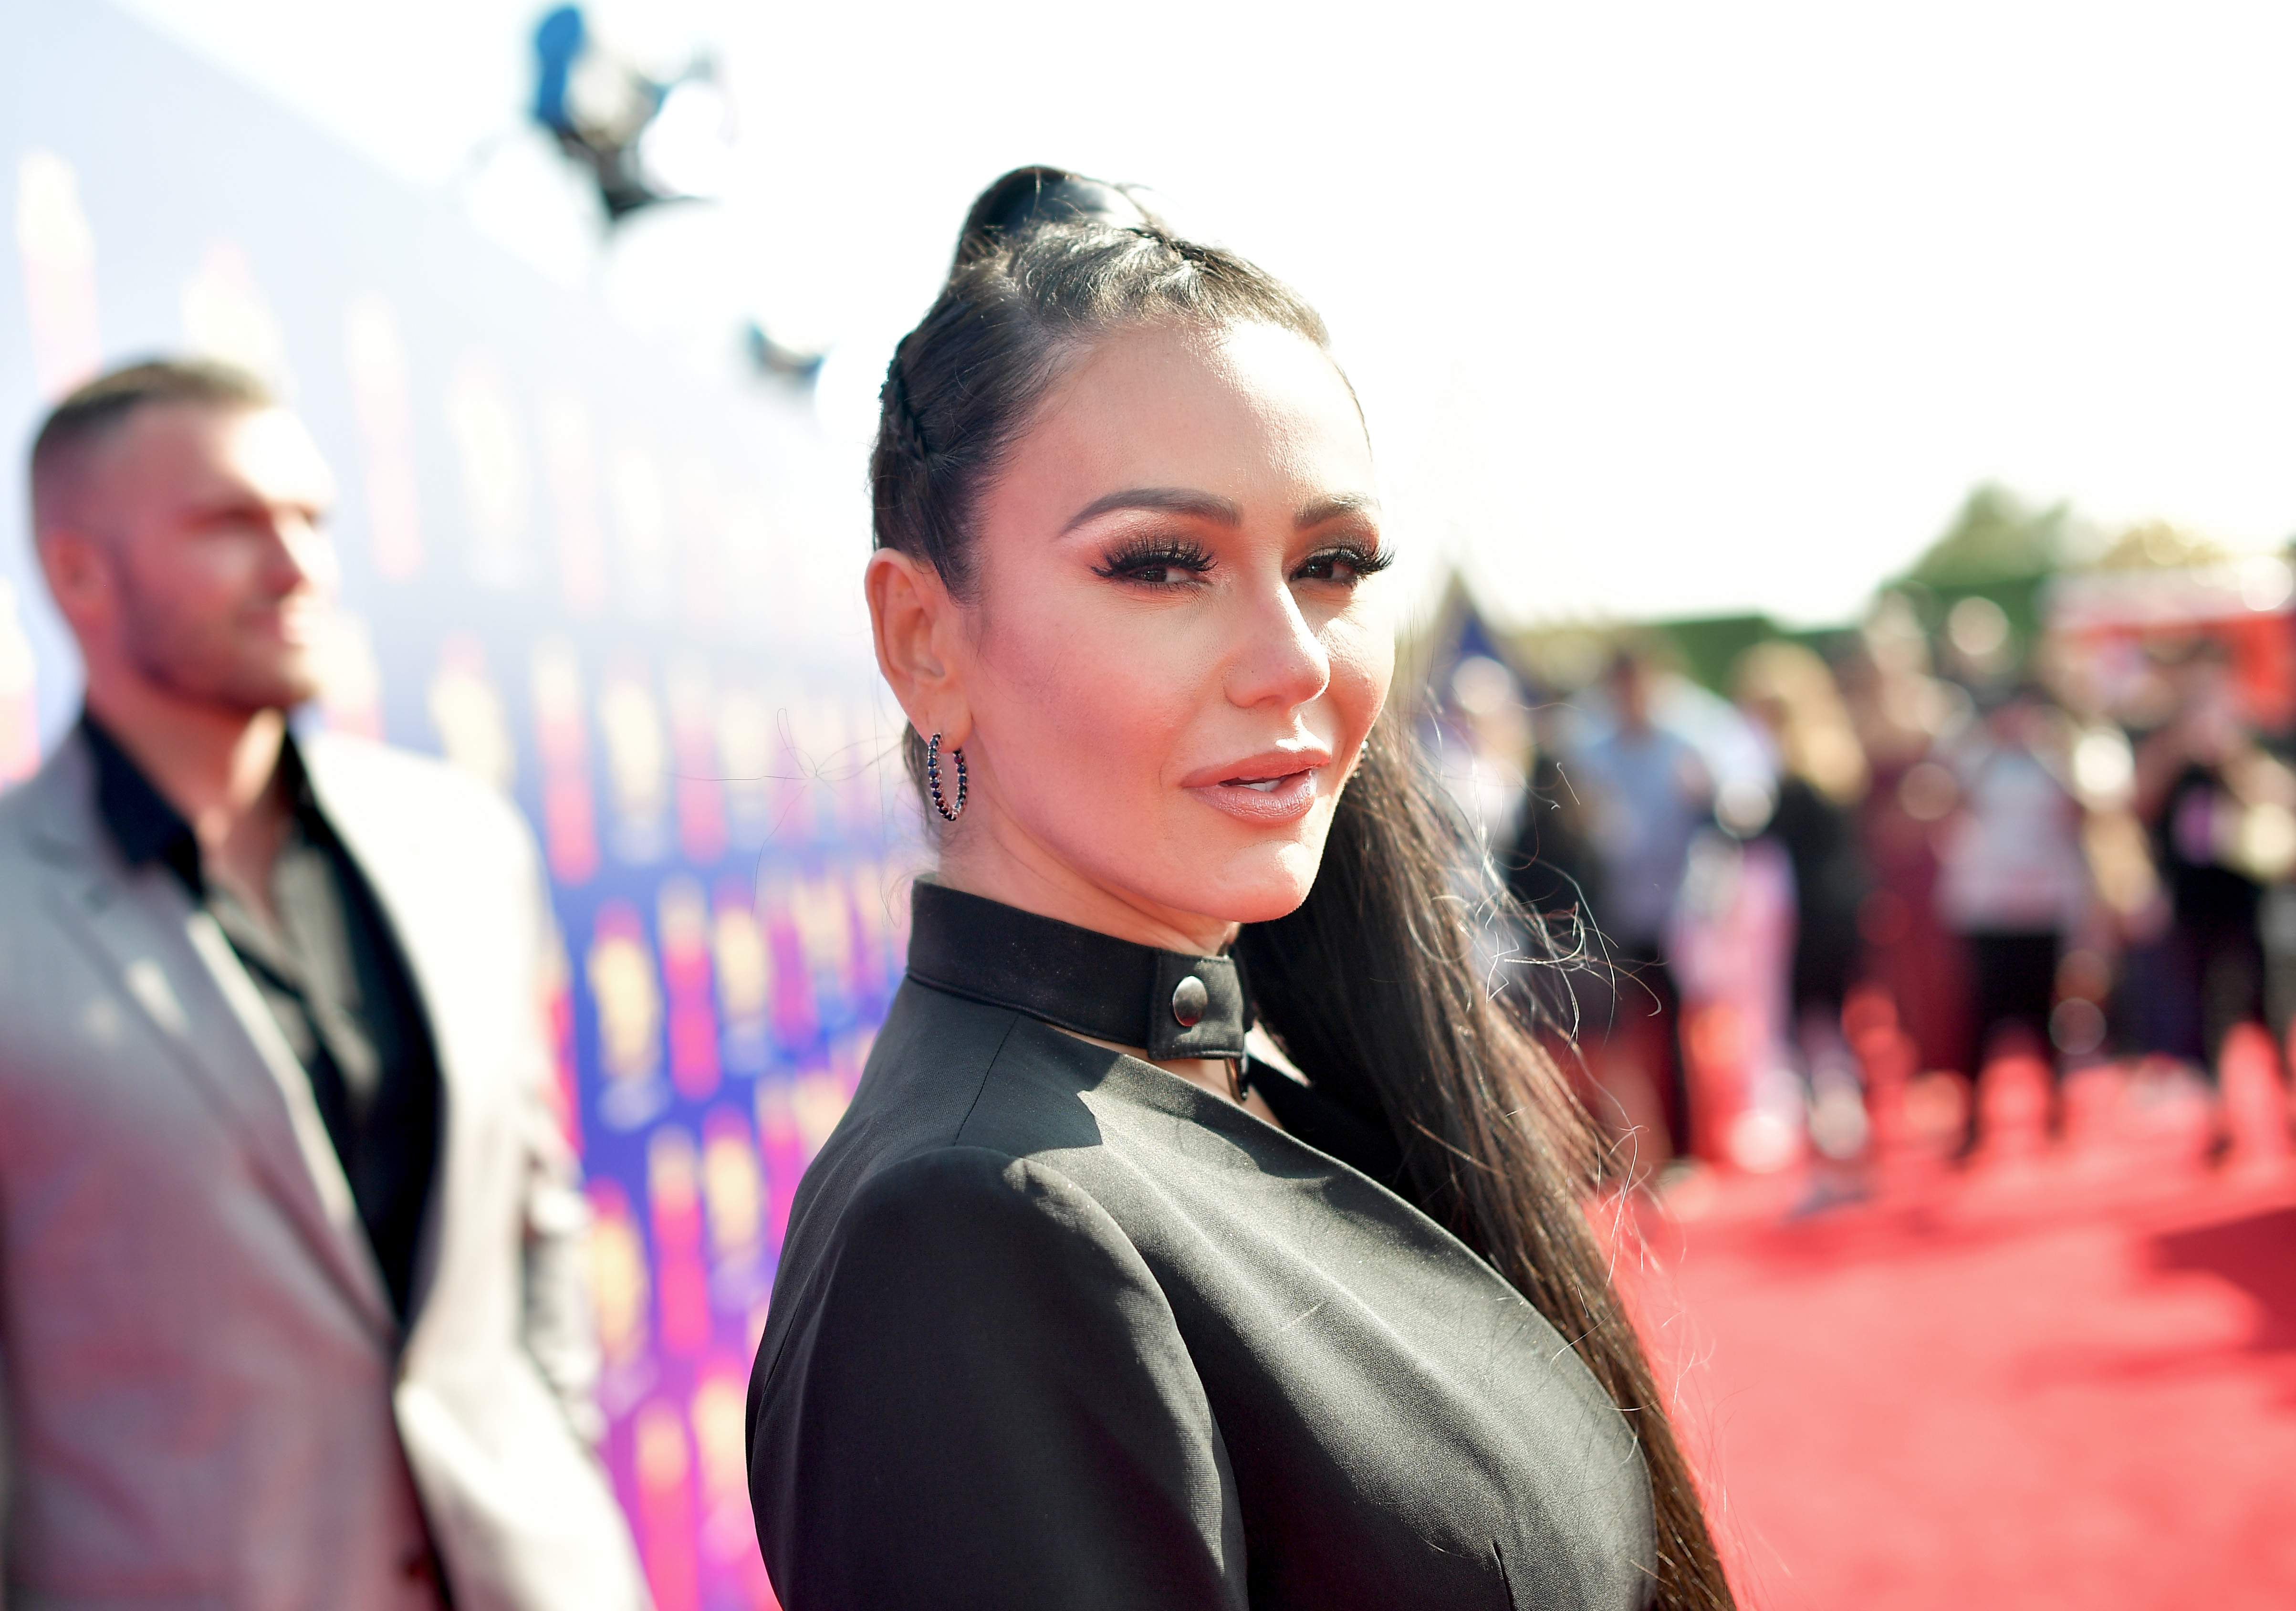 'Jersey Shore' star Jenni 'JWoww' Farley turns her head to look at the camera at an event